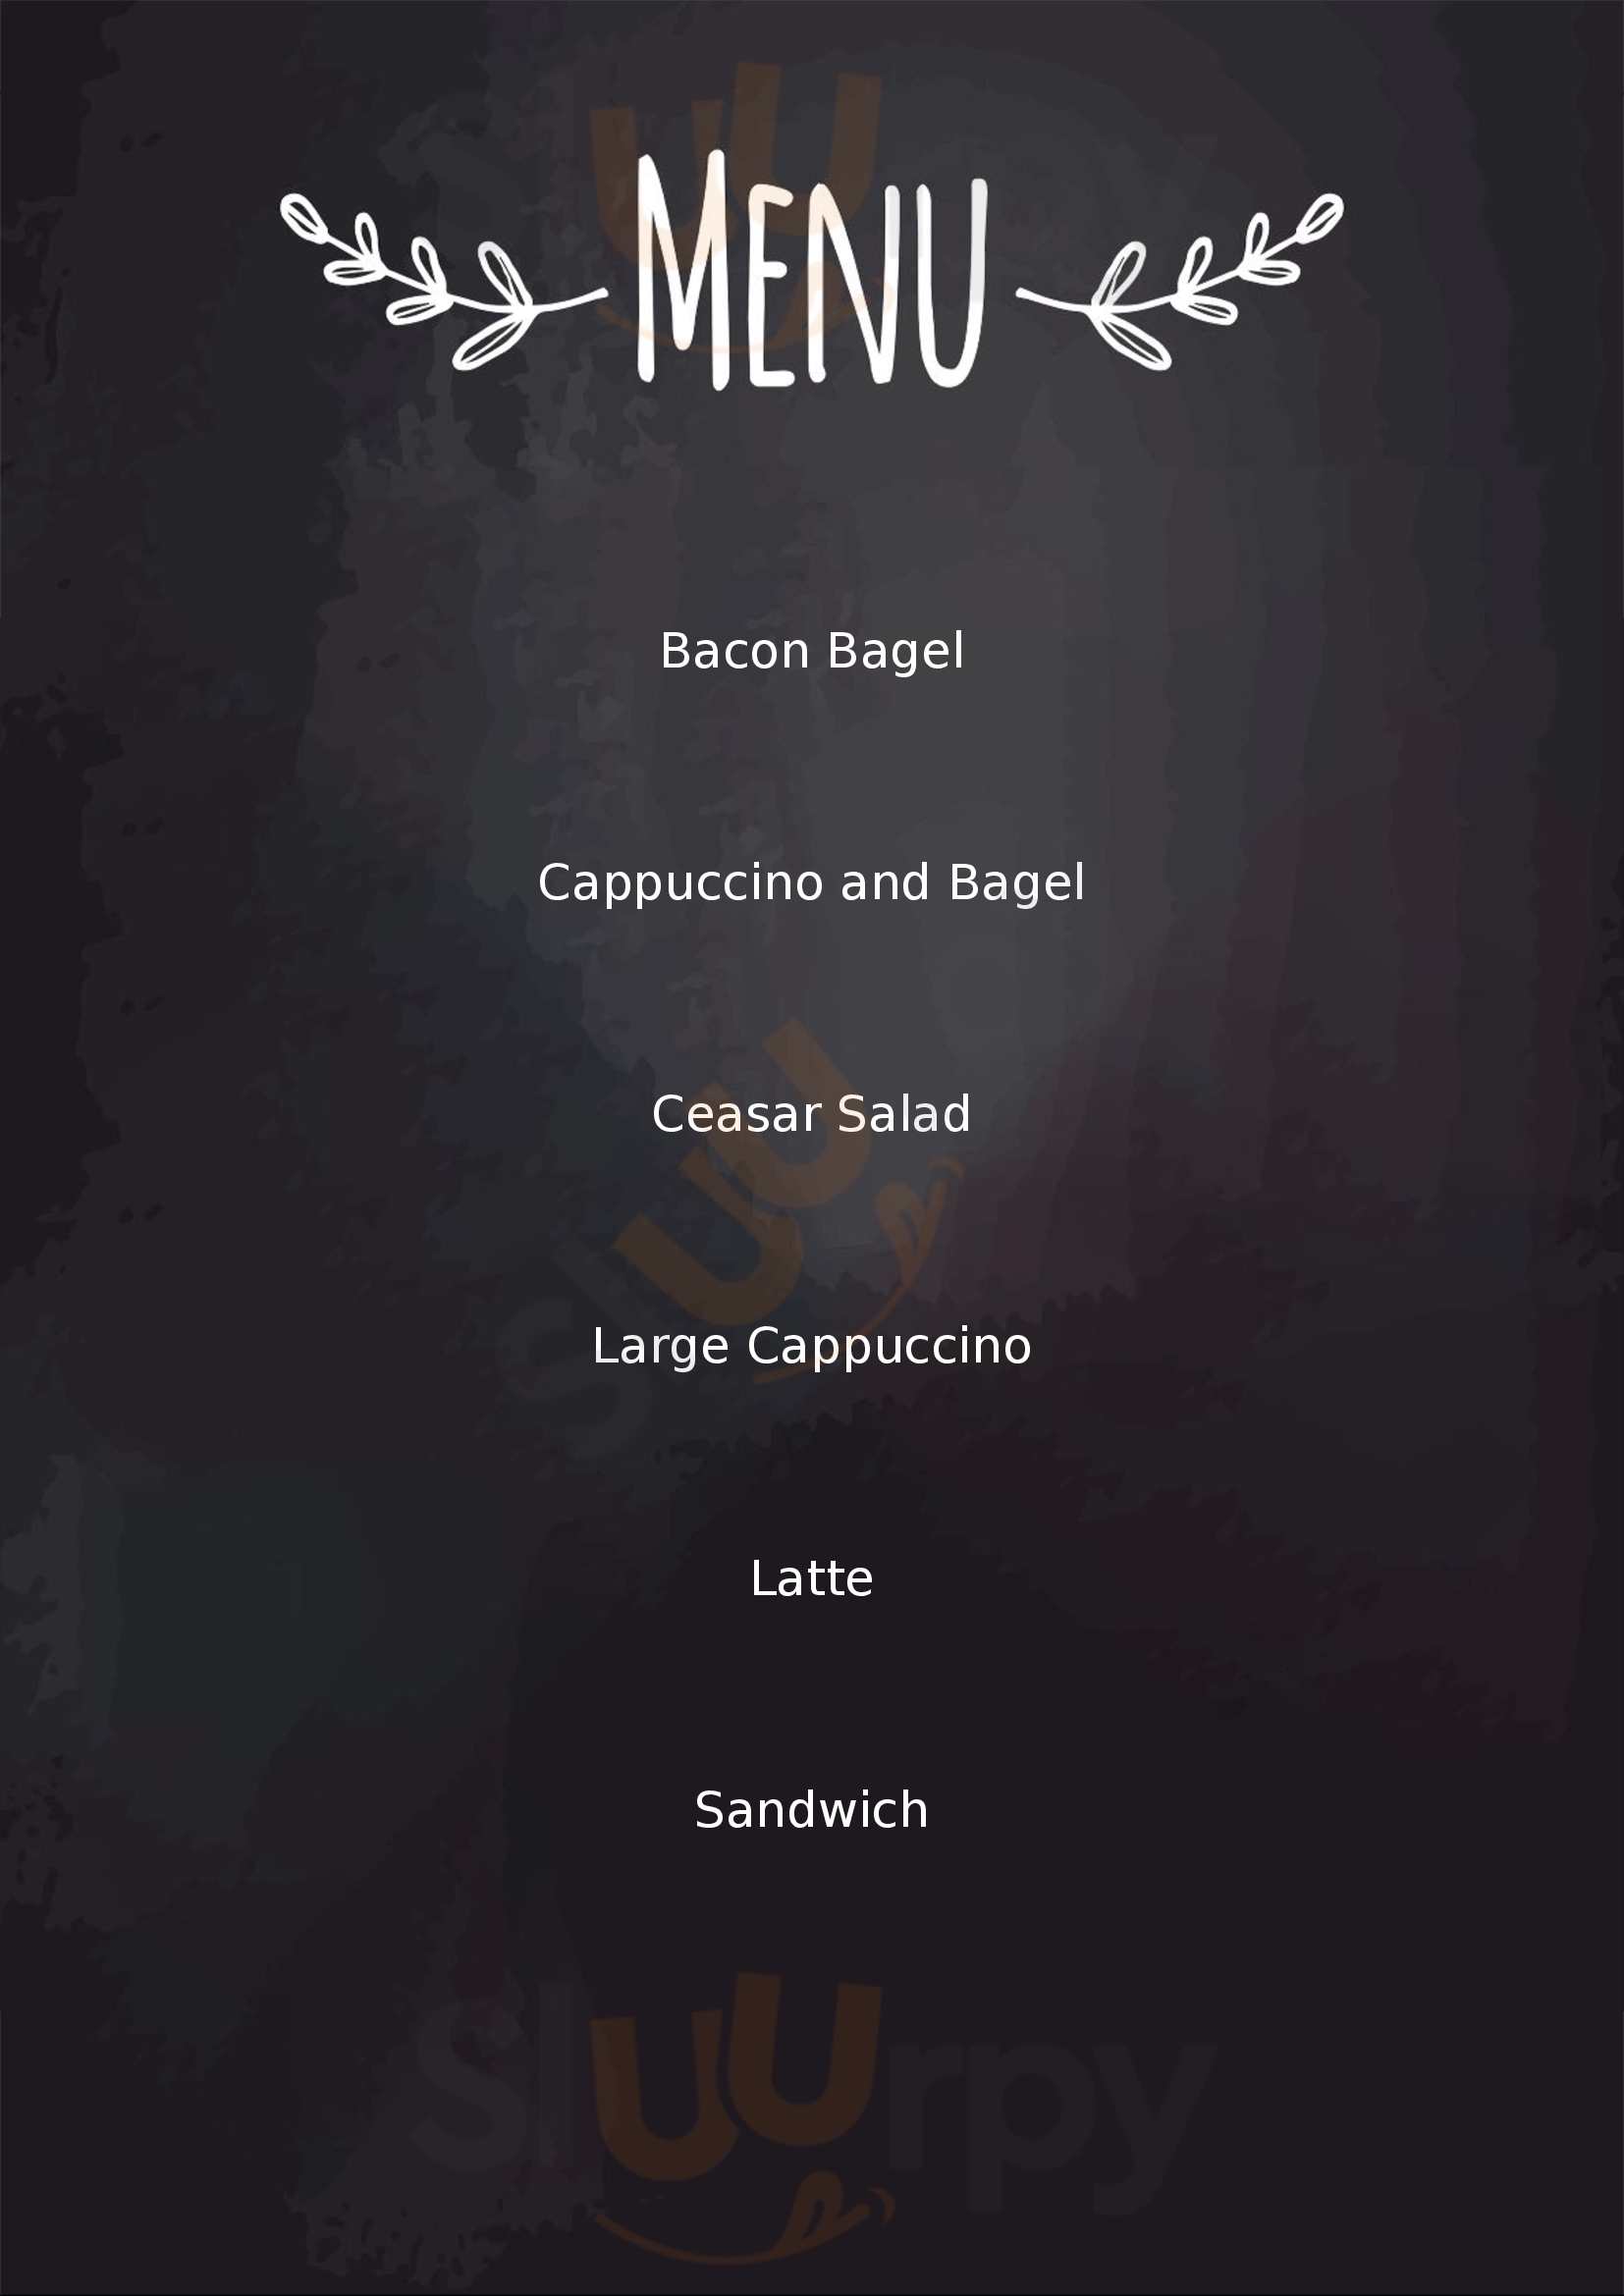 O'briens Handcrafted Sandwiches And Coffee Dublin Menu - 1